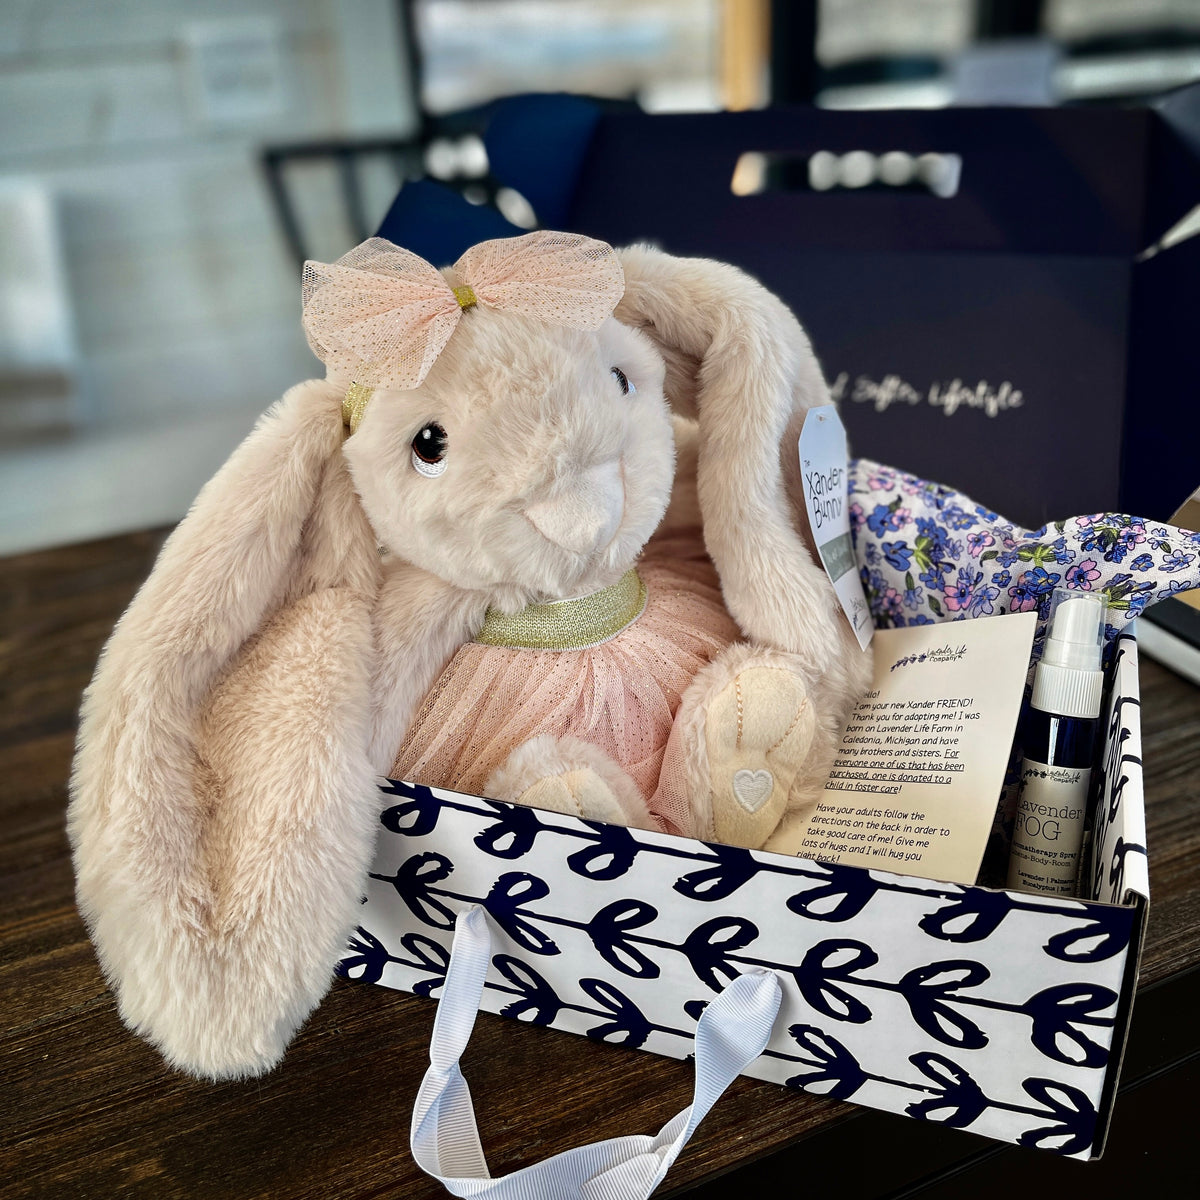 Xander Stuffed Bunny Gift Set- With Clothing & More